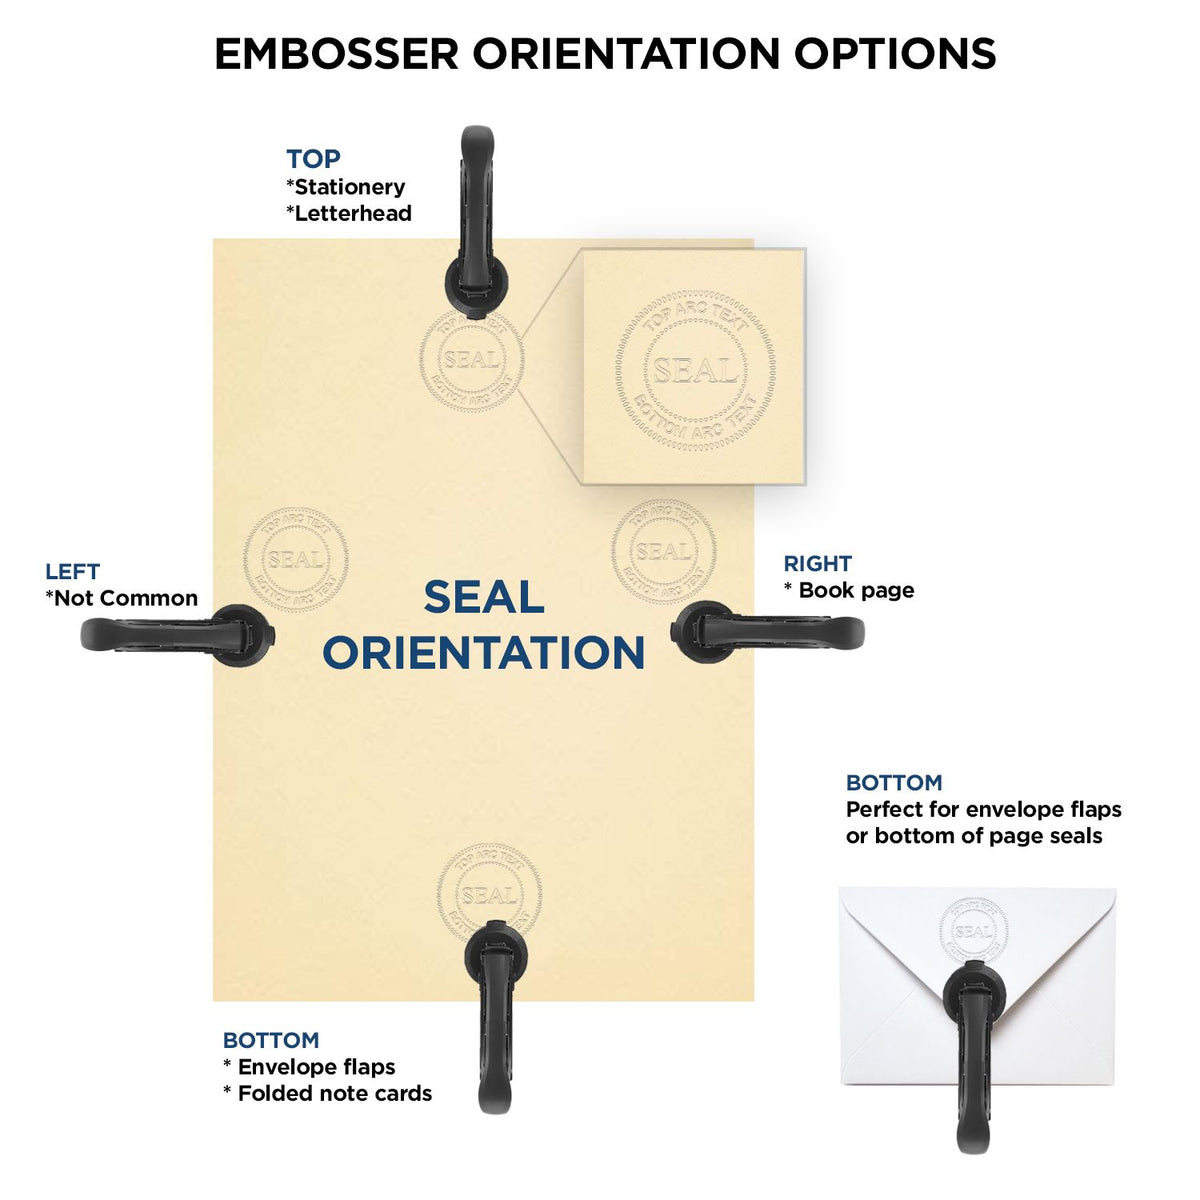 An infographic for the State of Washington Extended Long Reach Engineer Seal showing embosser orientation, this is showing examples of a top, bottom, right and left insert.